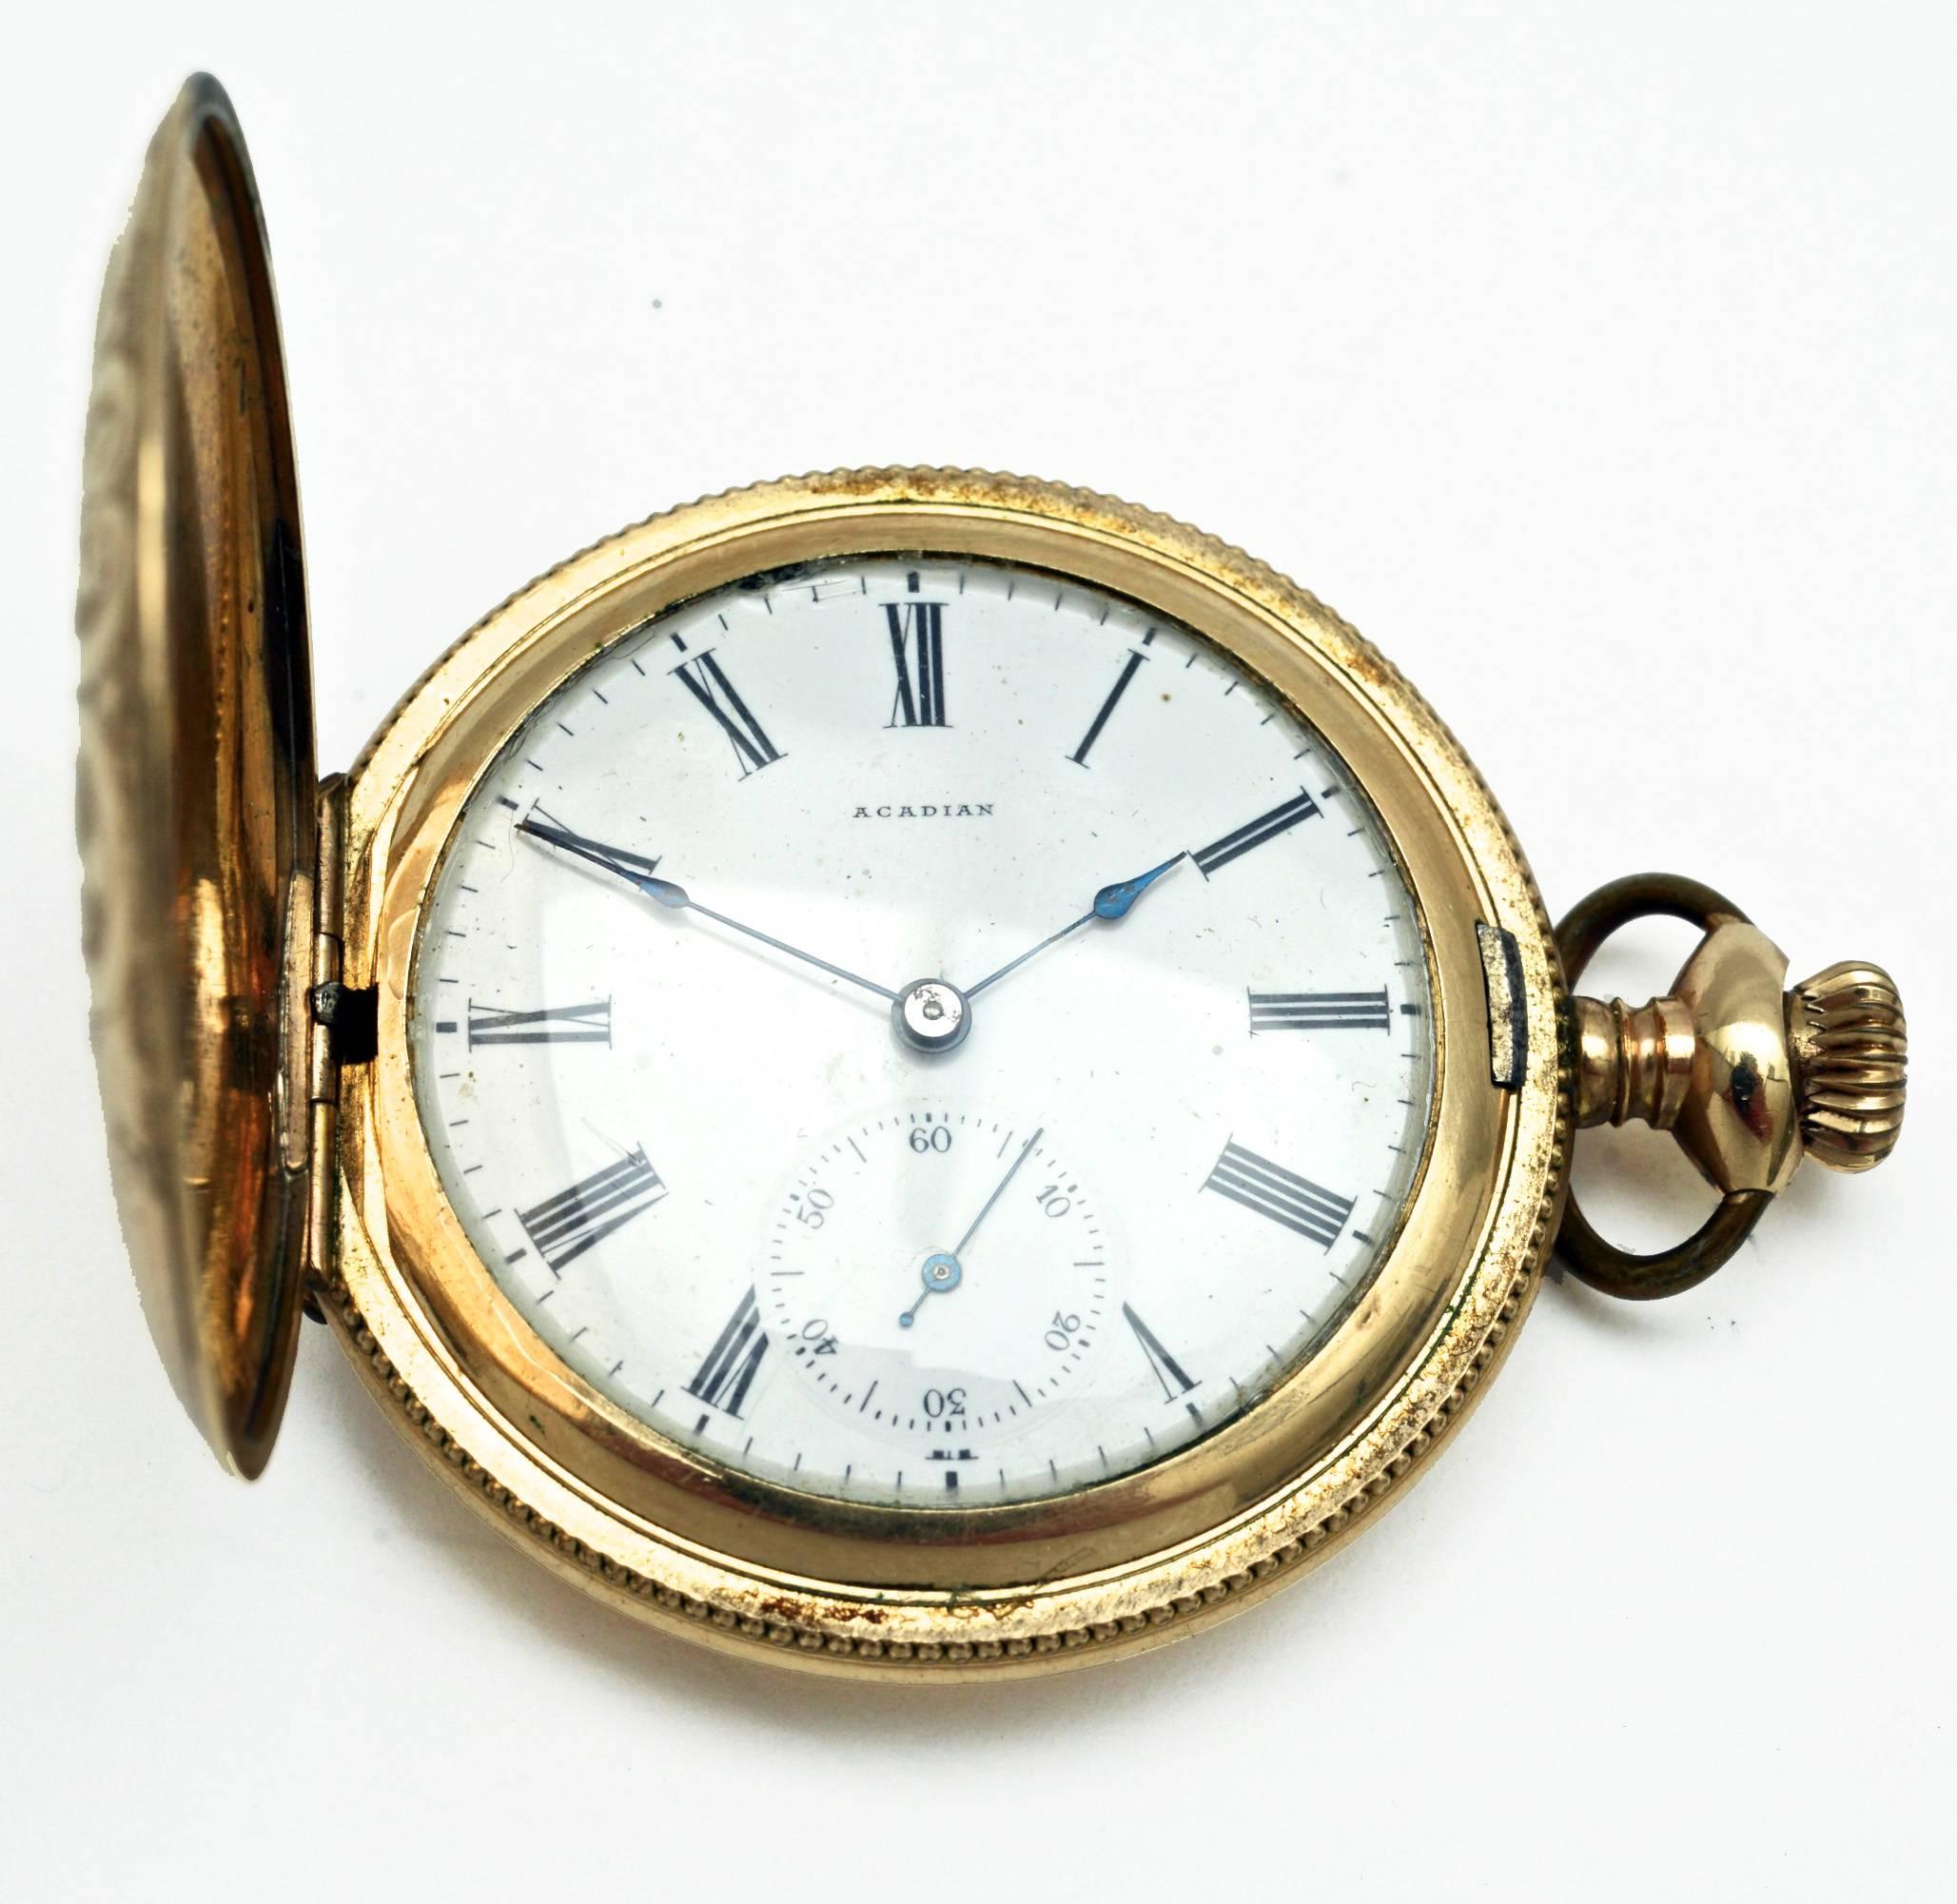 Vintage Arcadian gold-filled pocket watch with engraved triple hunter case. The signed and numbered ''Monitor'' case opens to a dial with Roman numerals and separate sub-second hand. The case has a cartouche for initials that has never been